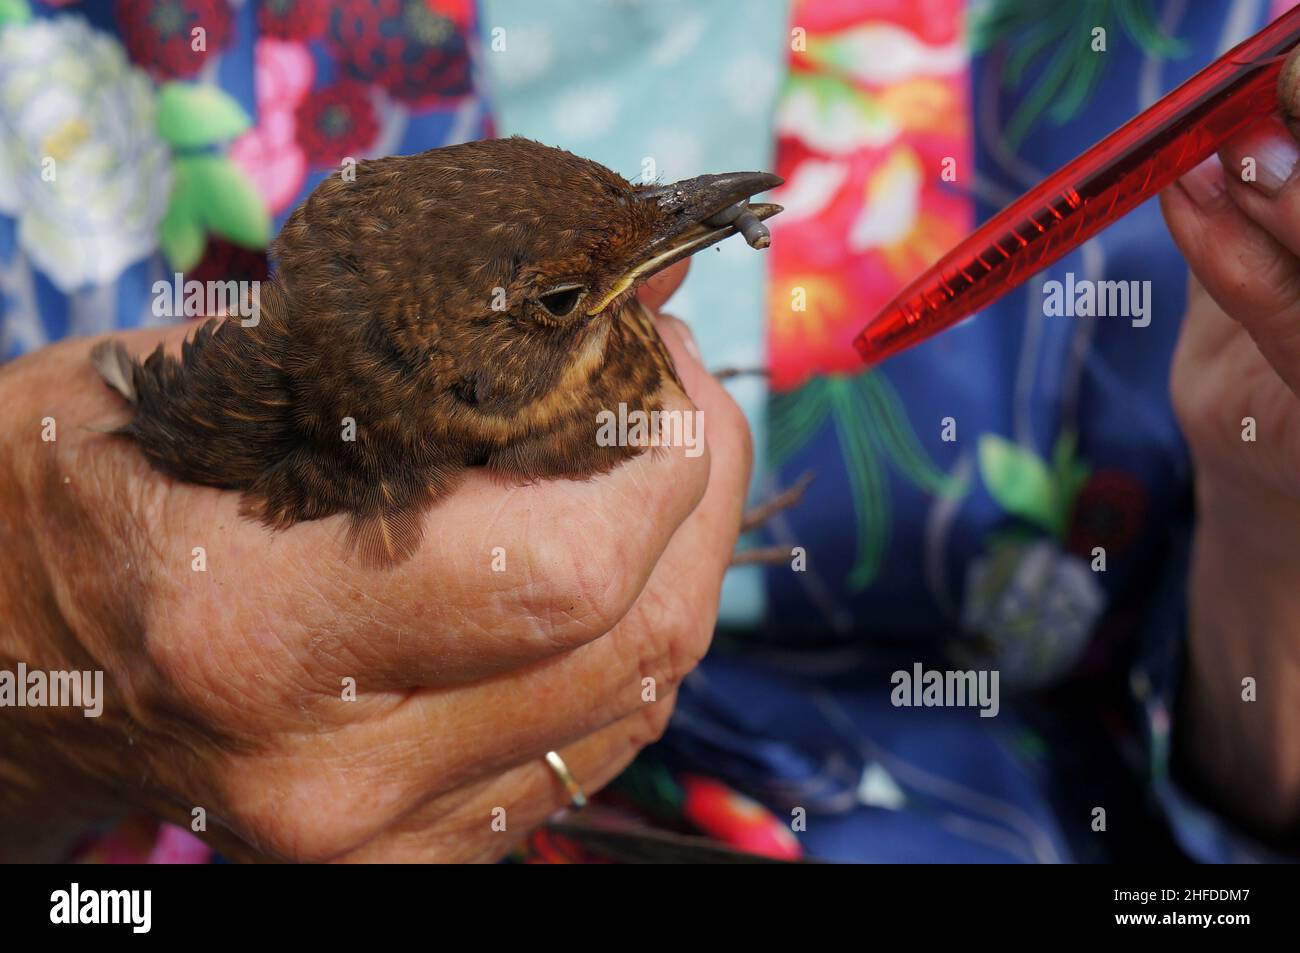 Close-up of an Injured young bird while being hand-fed by a caring human Stock Photo